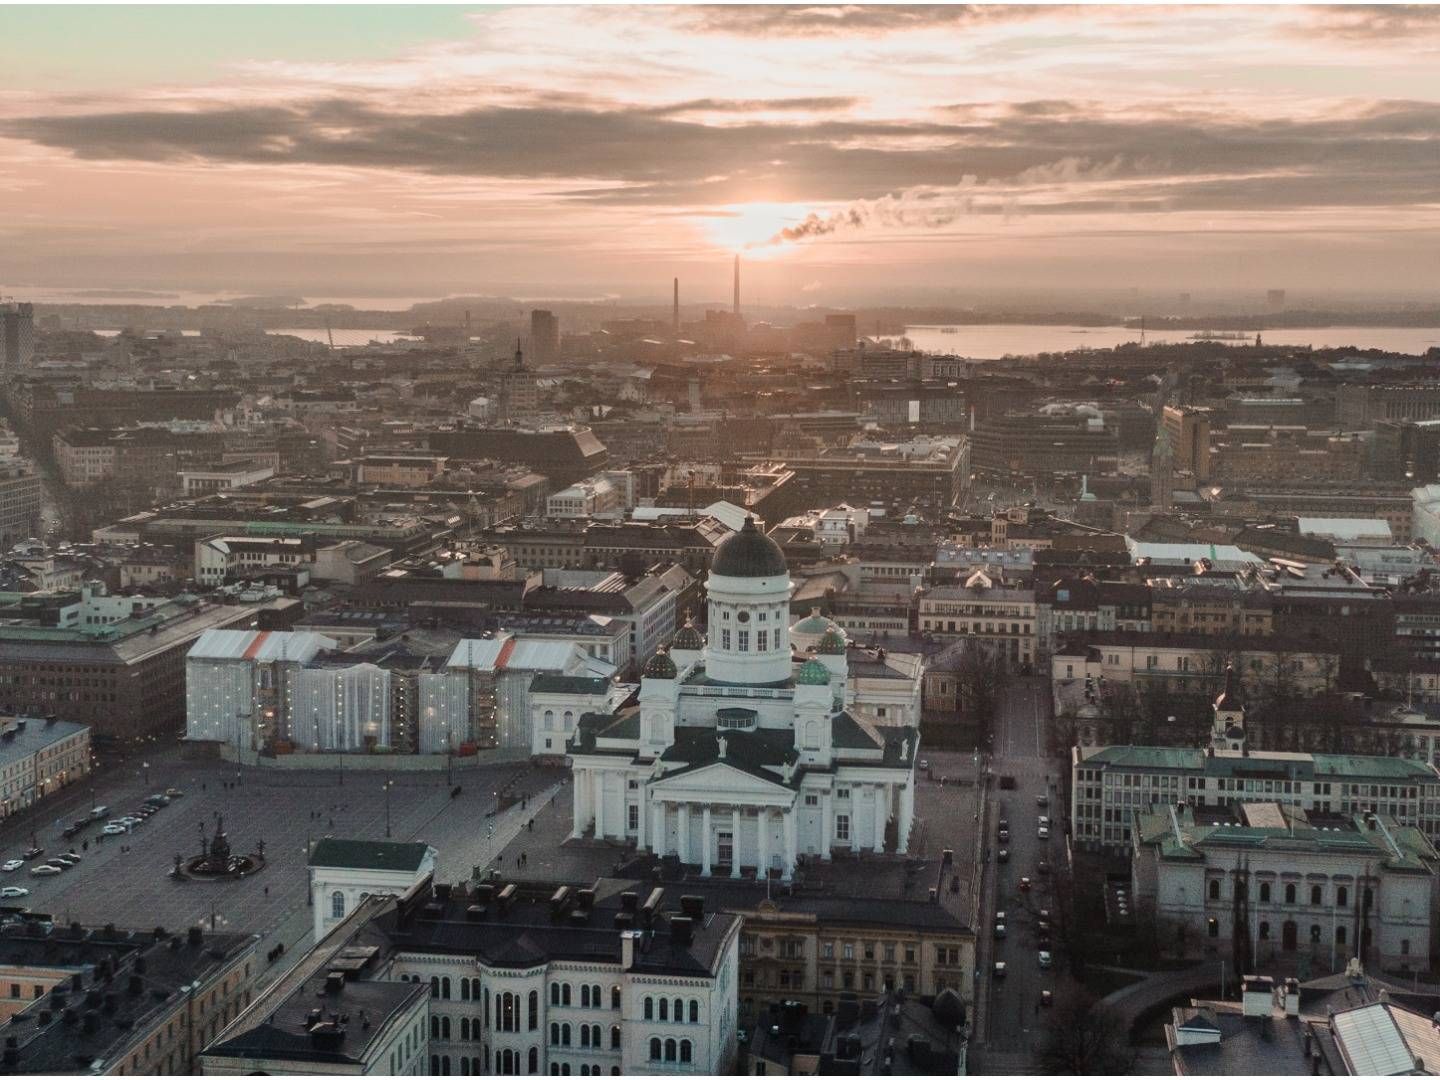 Helsinki-headquartered Mehiläinen has more than 800 locations with operations in countries including Finland, Estonia, Sweden and Germany. | Photo: Pexels: Chris Economou.